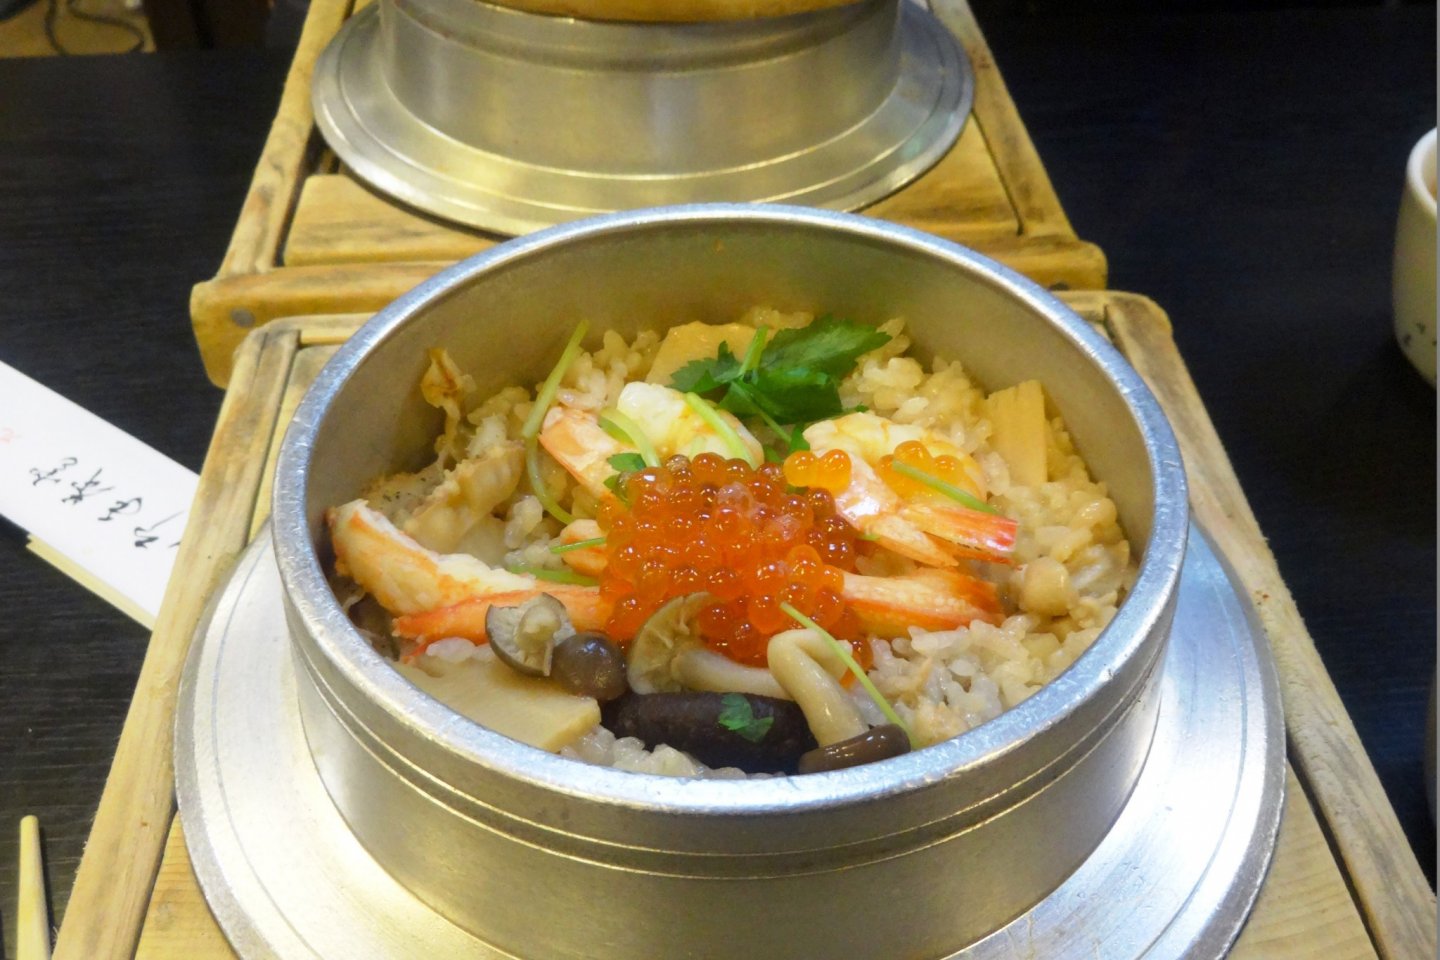 Kamameshi, or rice cooked in an iron pot